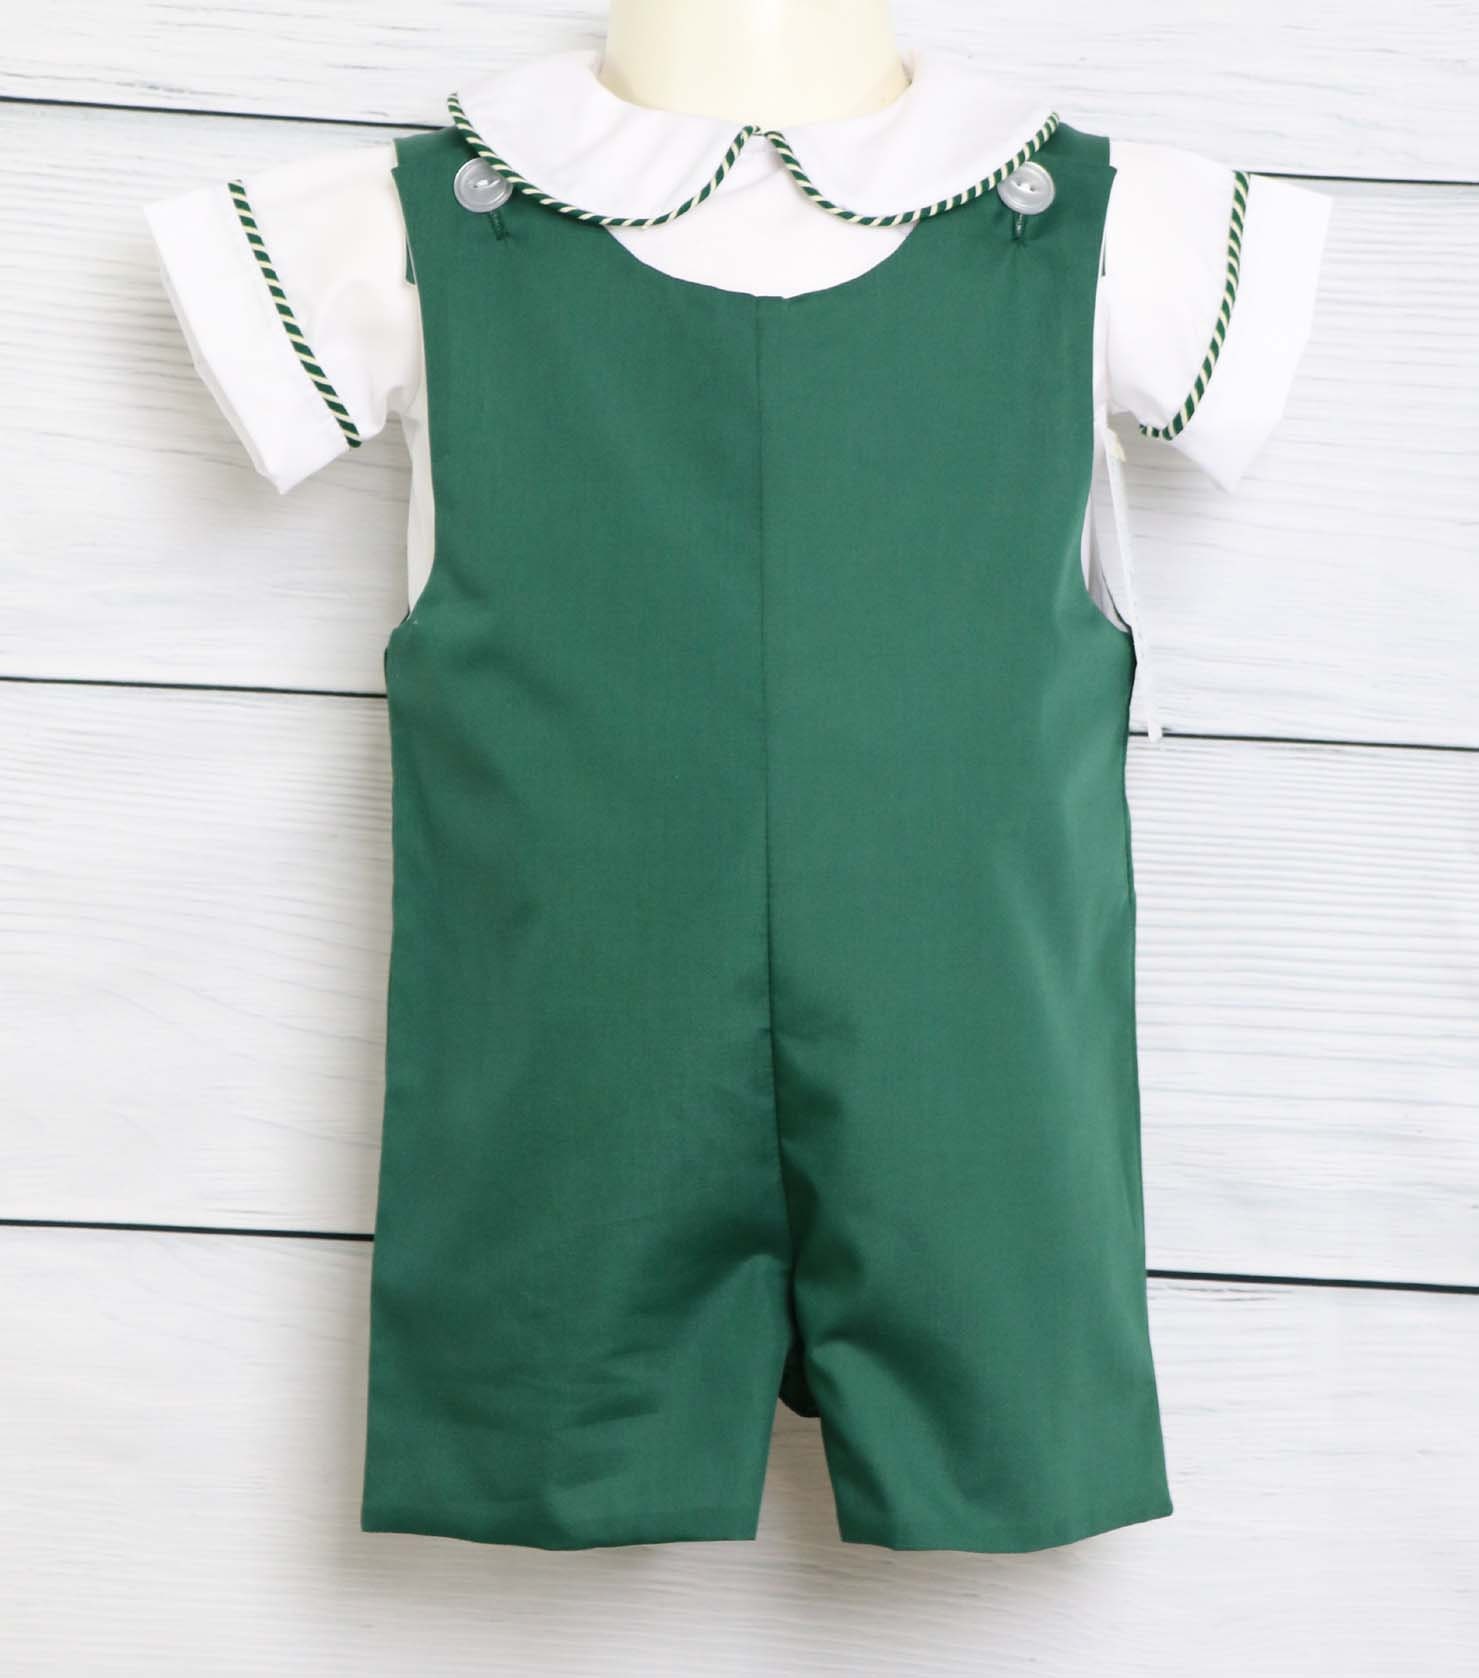 baby boy formal christmas outfit